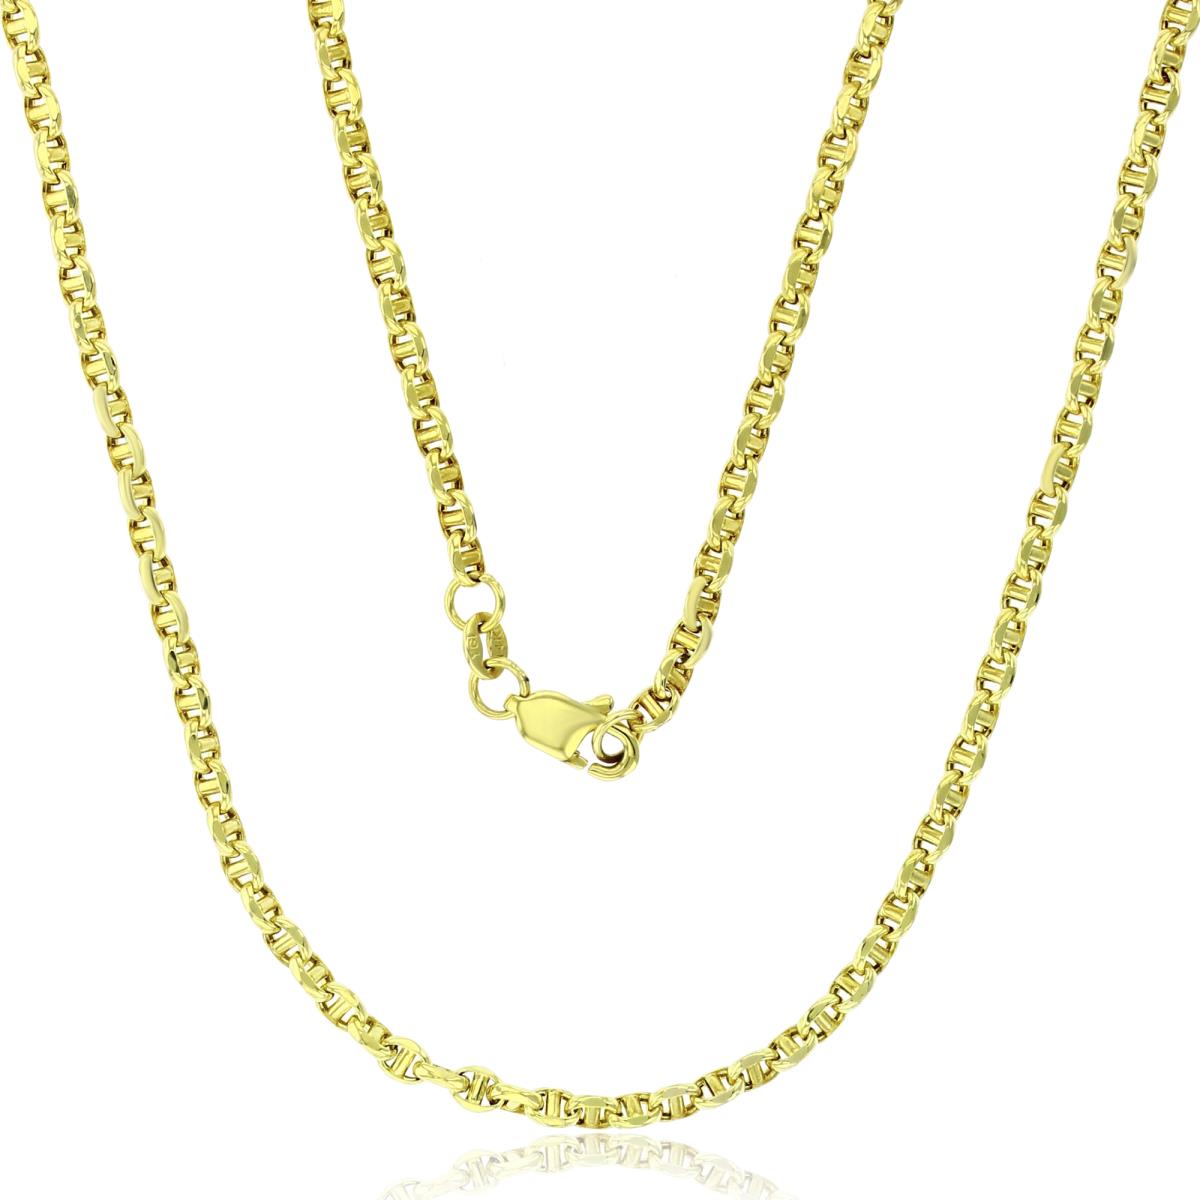 10K Yellow Gold Polished 3.00mm 24" Hollow Filk Chain